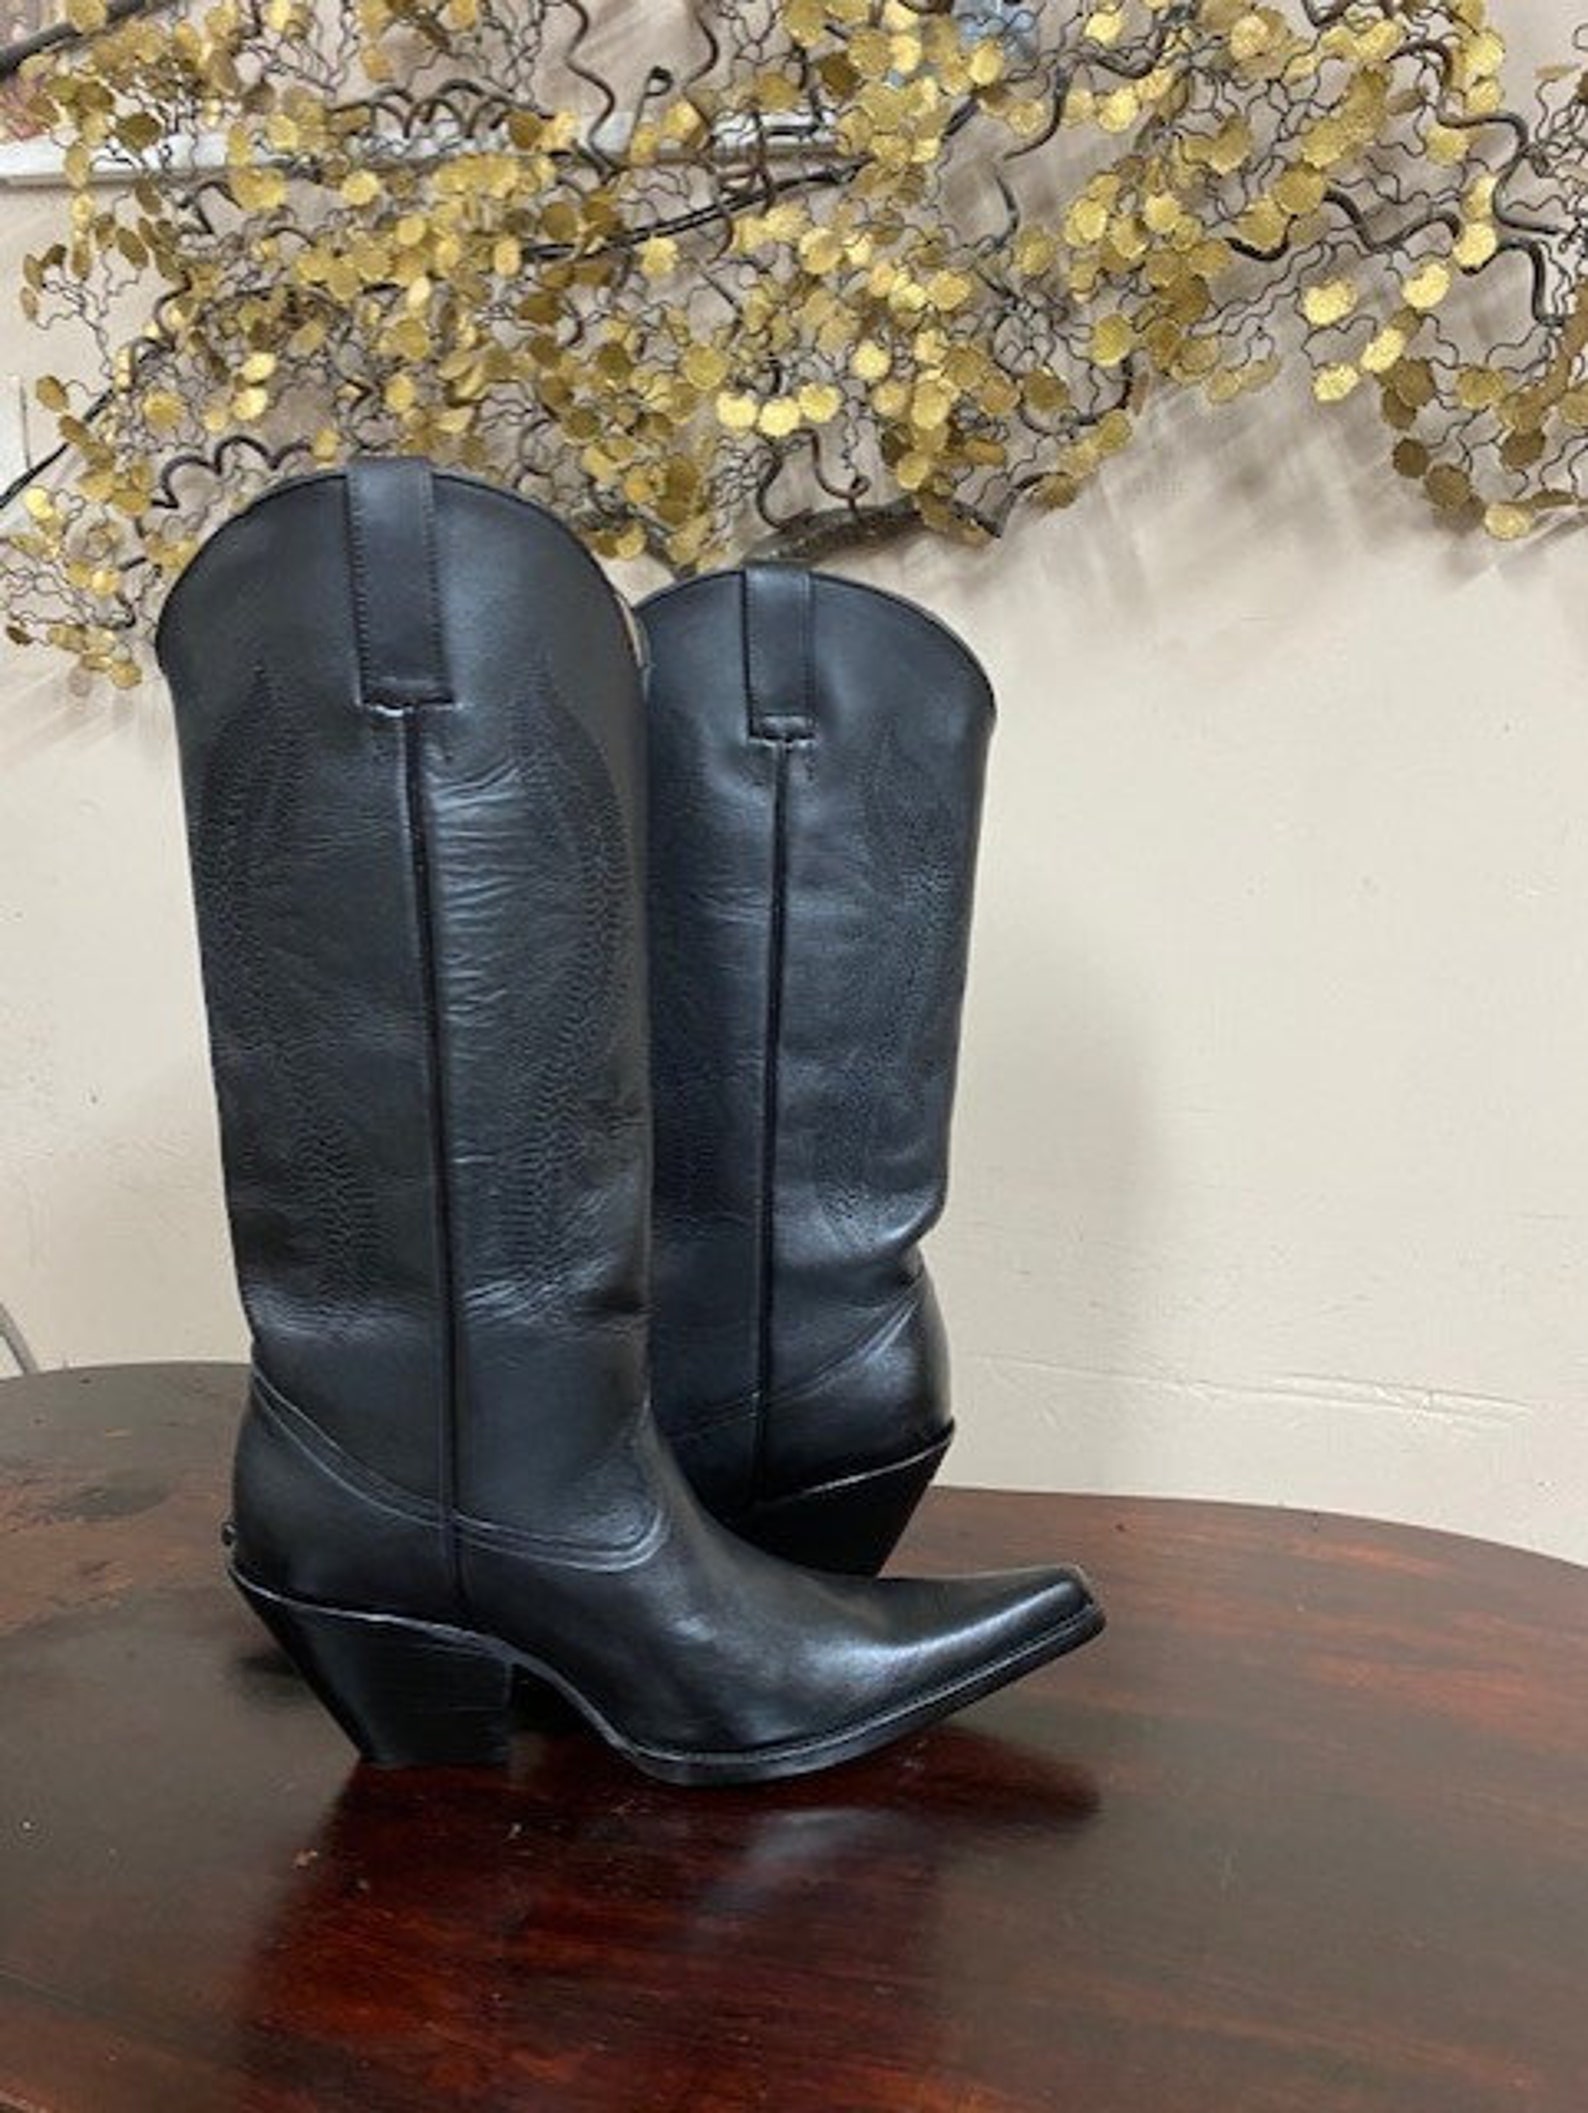 Sharp toe cowboy boots in stock all sizes available to ship | Etsy